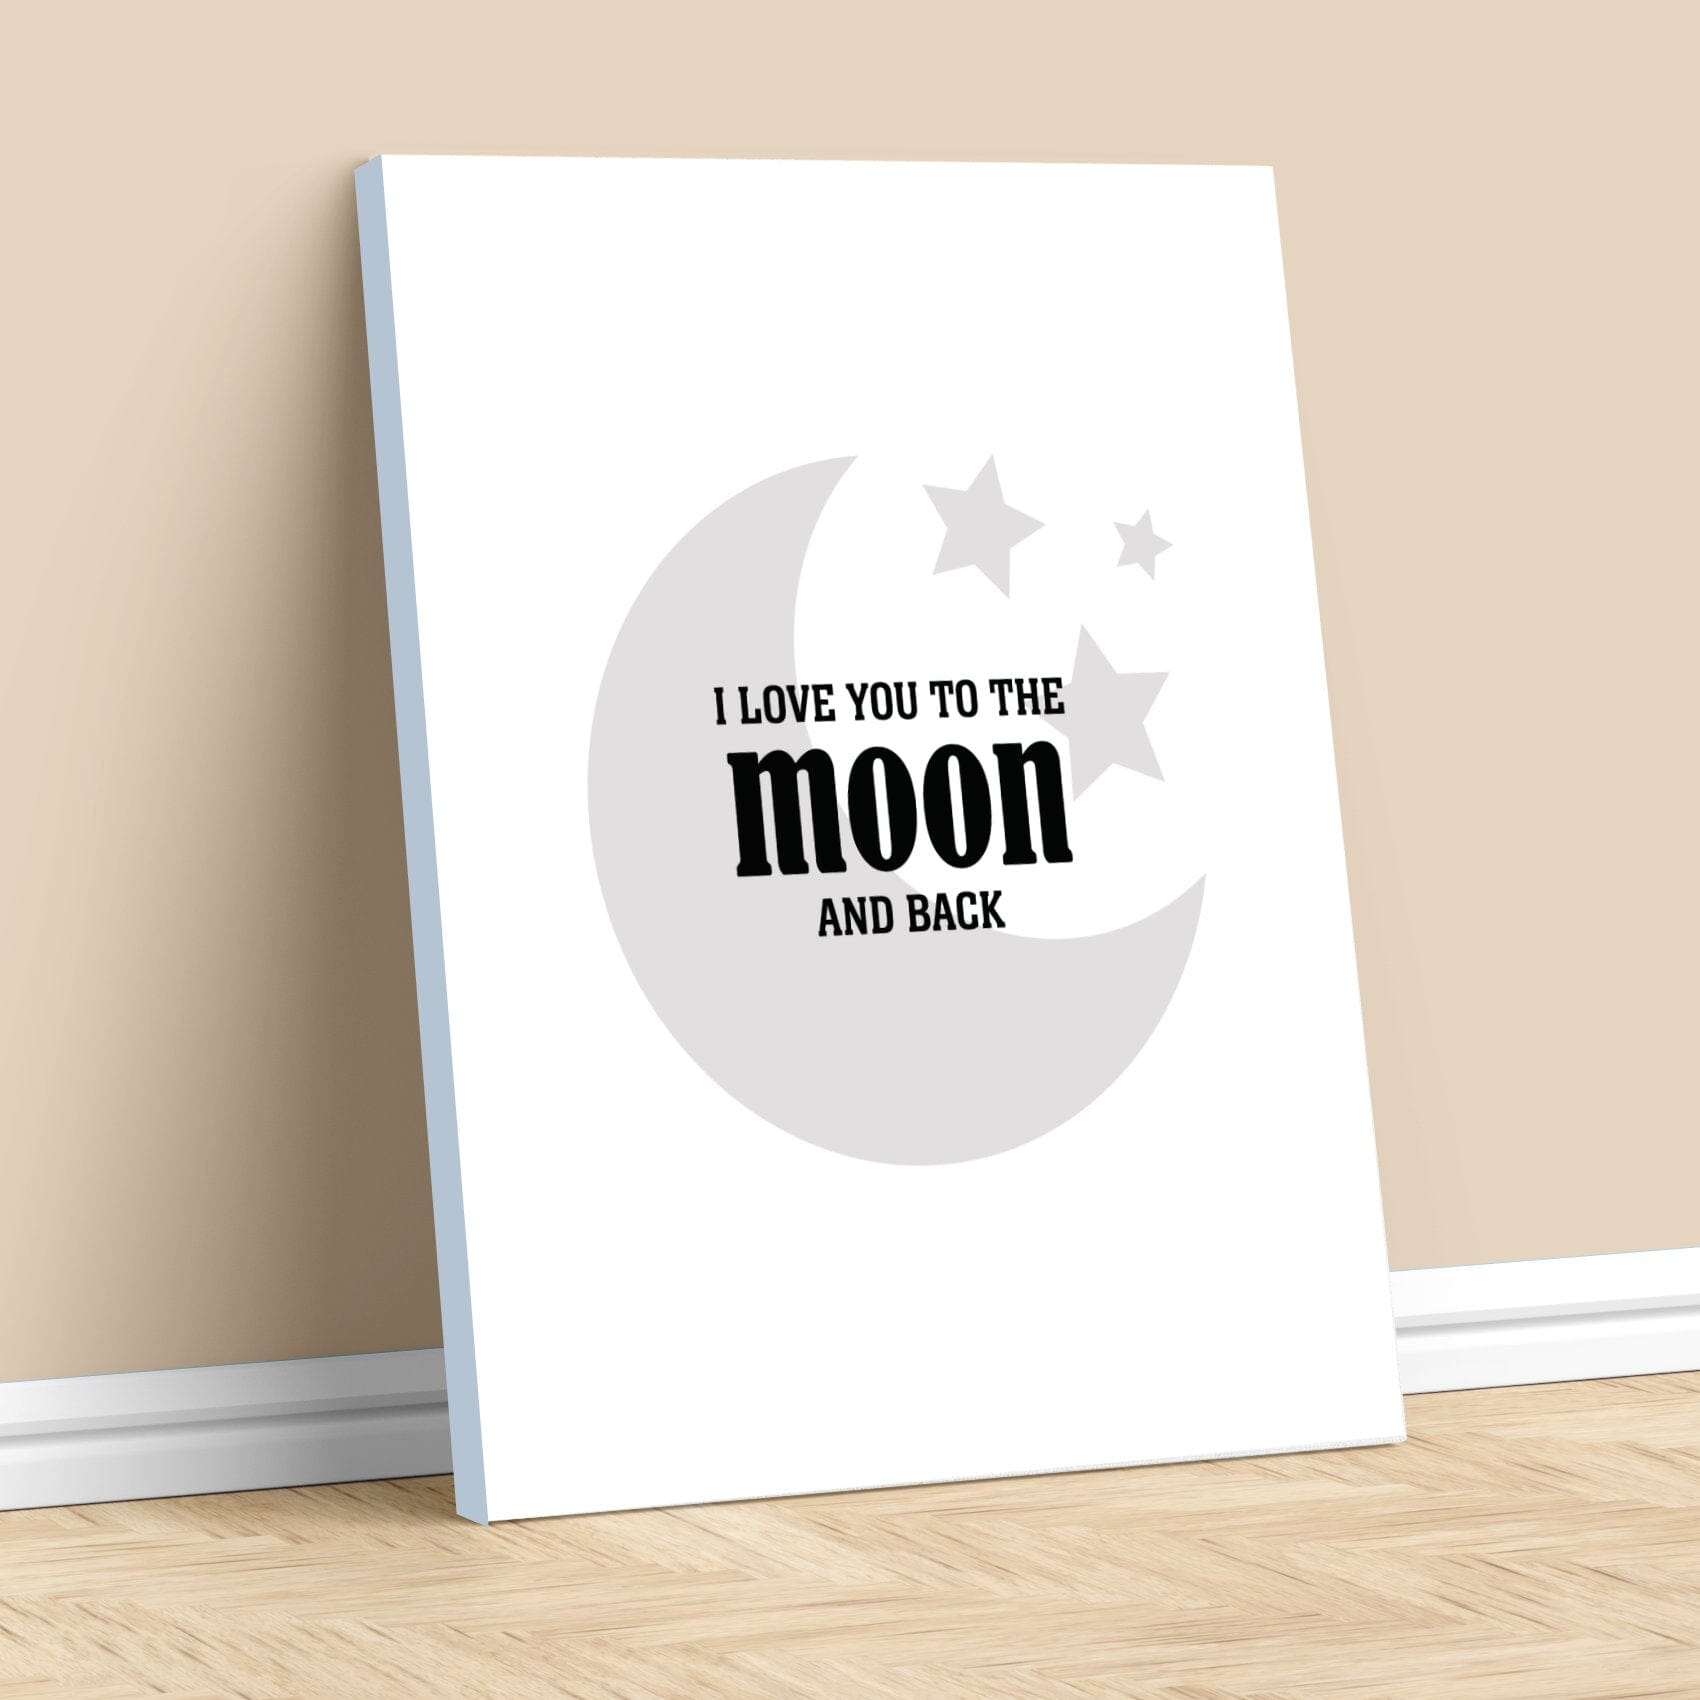 I Love You to the Moon and Back - Wise and Witty Art Wise and Wiseass Quotes Song Lyrics Art 11x14 Canvas Wrap 